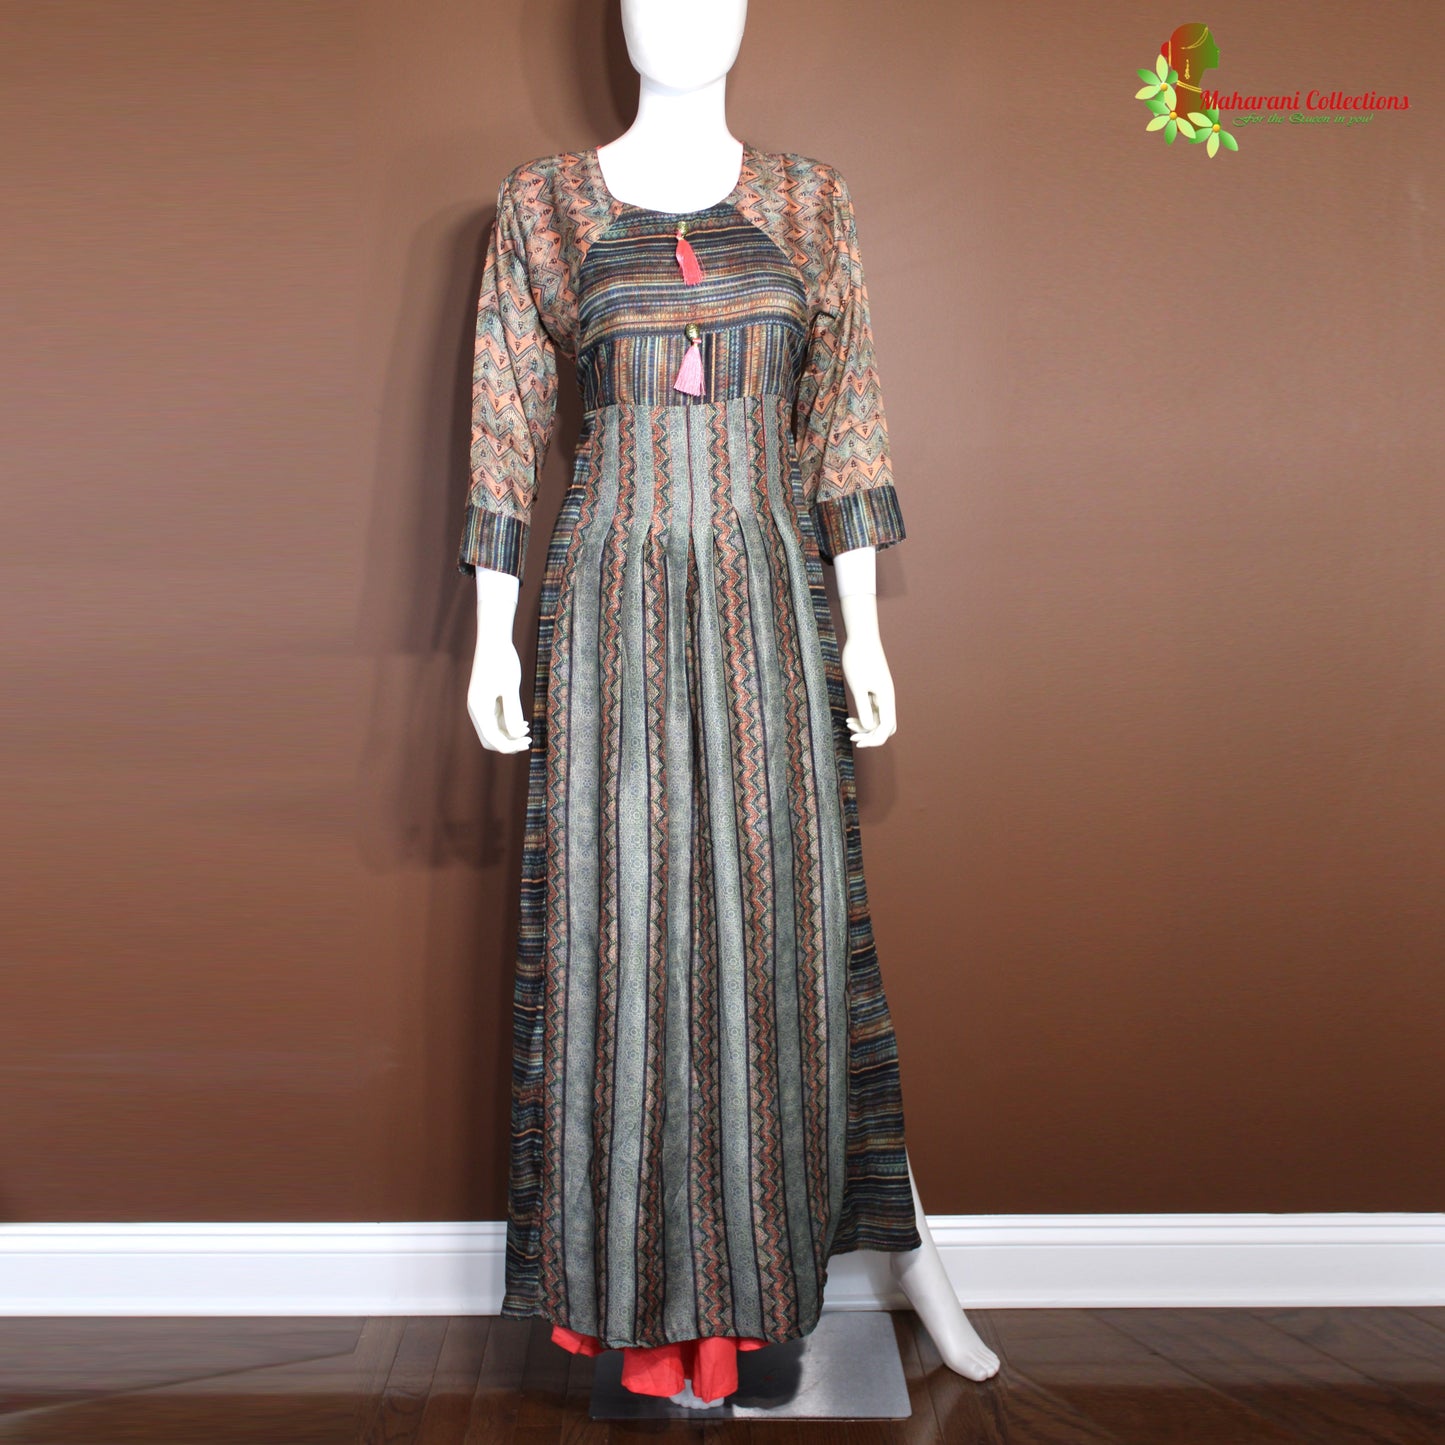 Maharani's Georgette Long Evening Dress - Brown/Red (S)